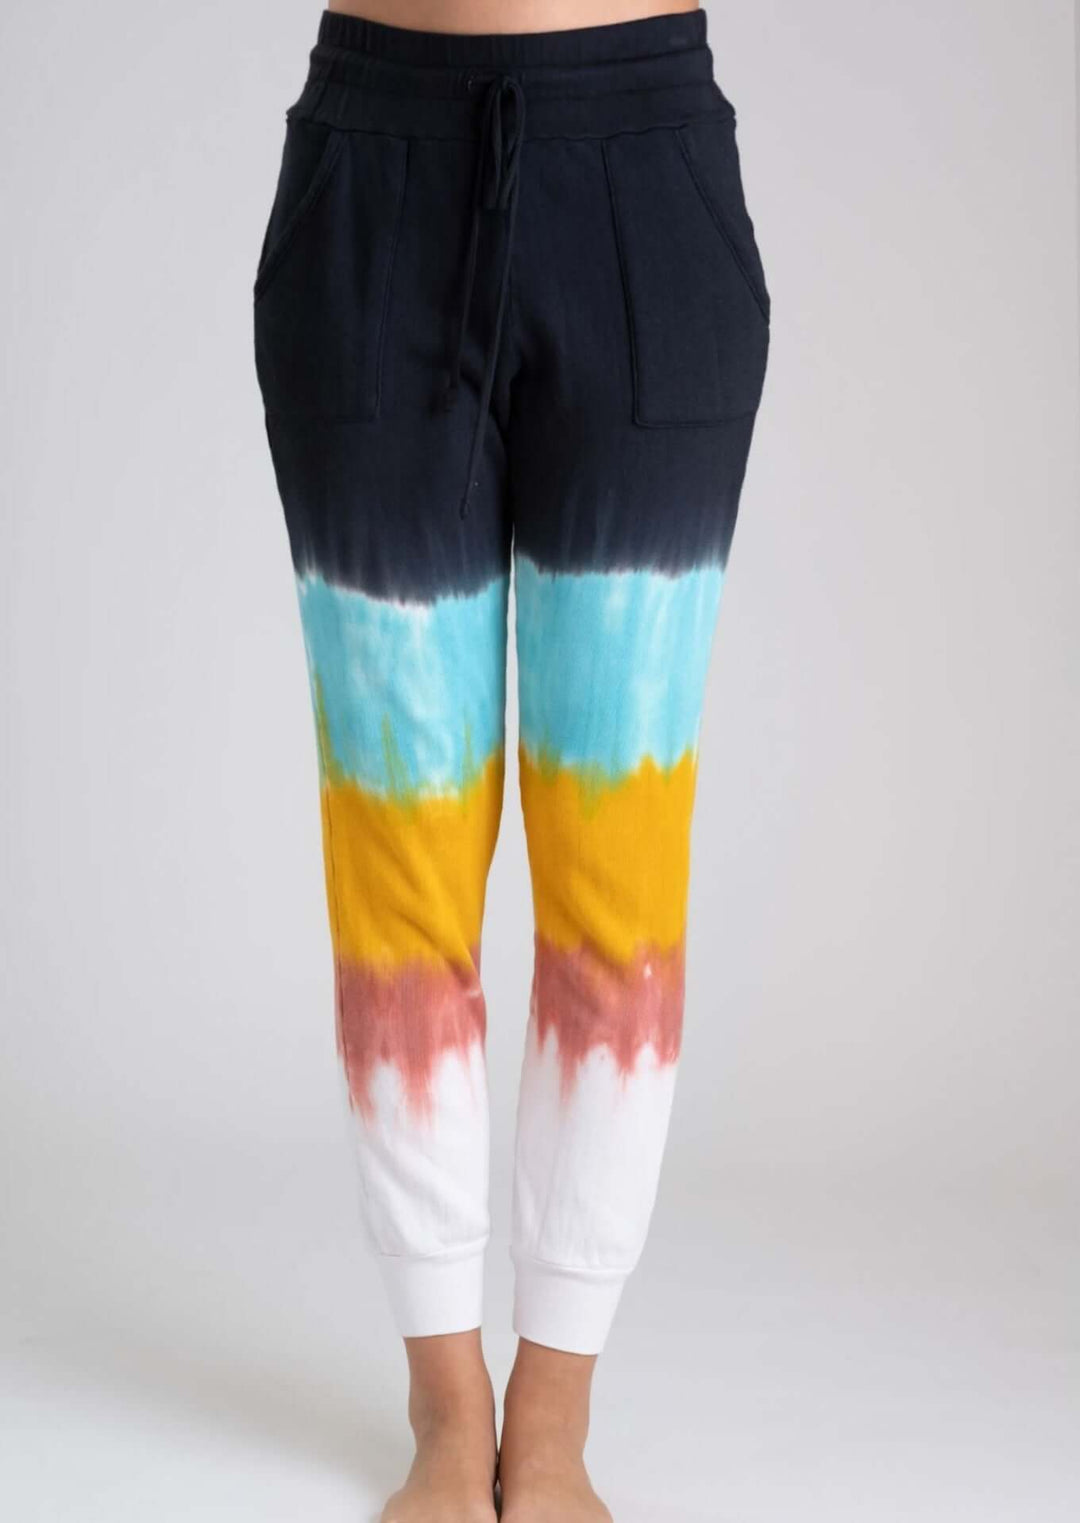 Jala Rainbow Tie Dye Pocket Joggers eco-friendly, ultra soft French terry sponge fleece -Style PJ540F | Made in the USA | Classy Cozy Cool Boutique